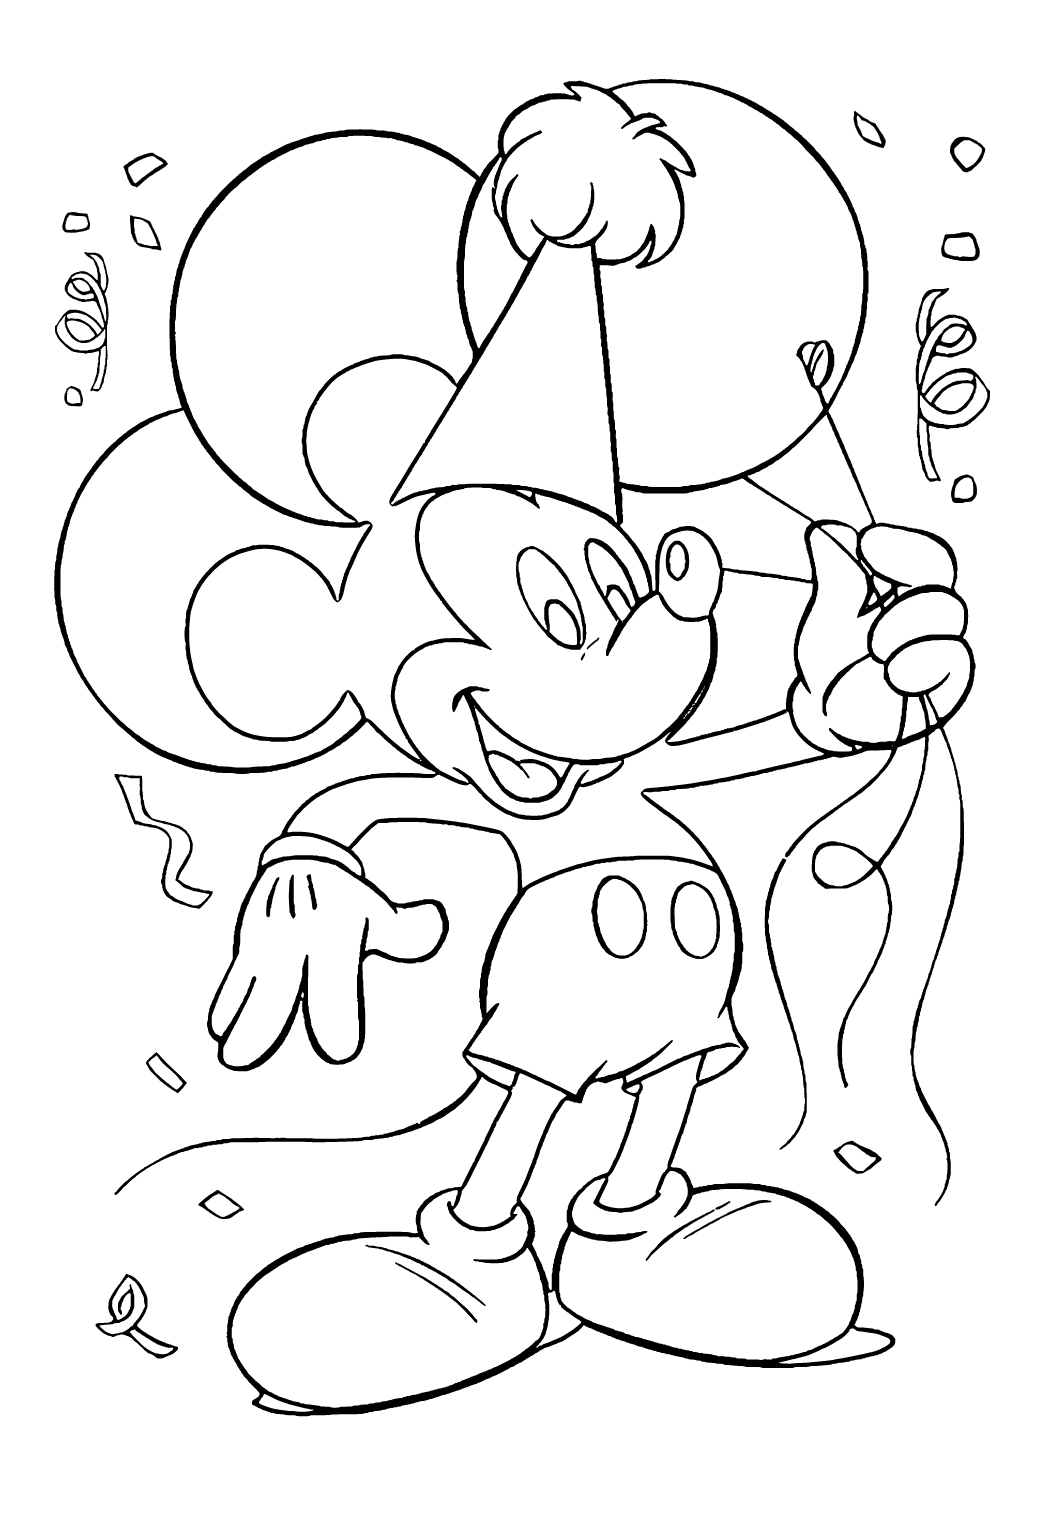 Mickey Mouse Clubhouse logo coloring page  Mickey mouse clubhouse, Mickey  coloring pages, Mickey mouse coloring pages